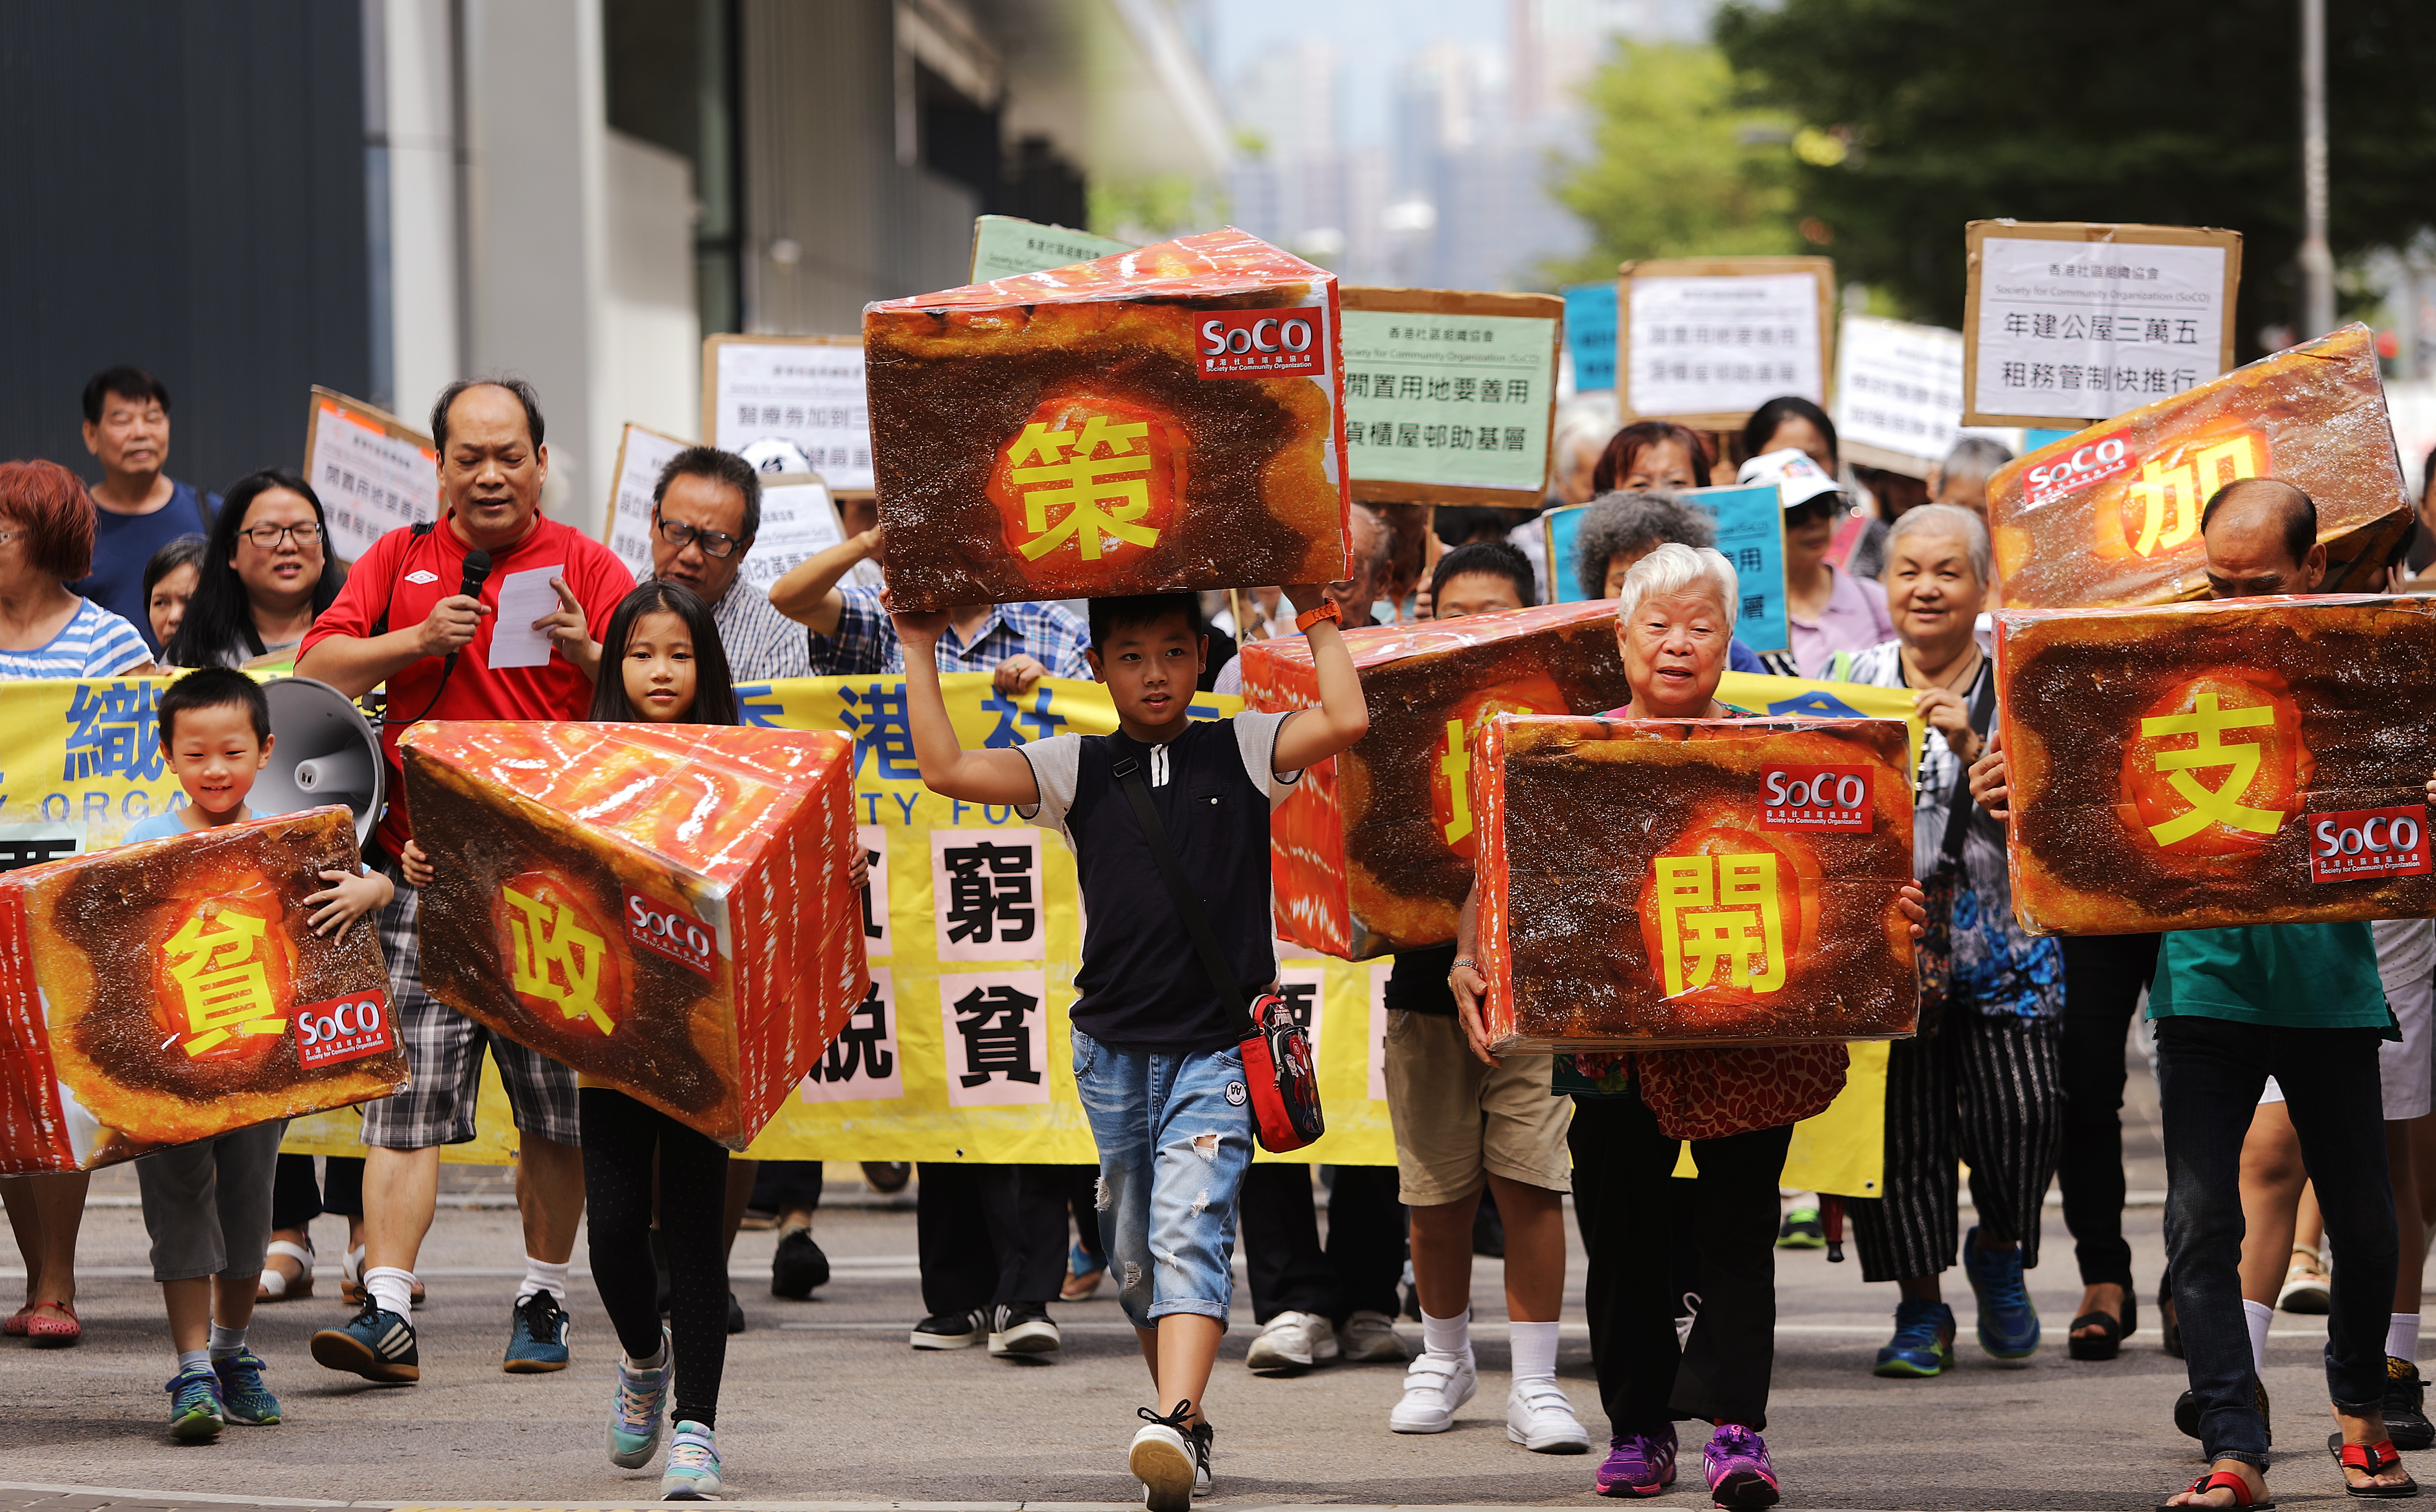 Members of the Society for Community Organisation march to the government headquarters to demand more poverty reduction measures in the Hong Kong chief executive’s policy address, on October 5. The 2017 policy address, delivered on October 11, pledged more resources for poverty alleviation and the disadvantaged. Photo: Sam Tsang